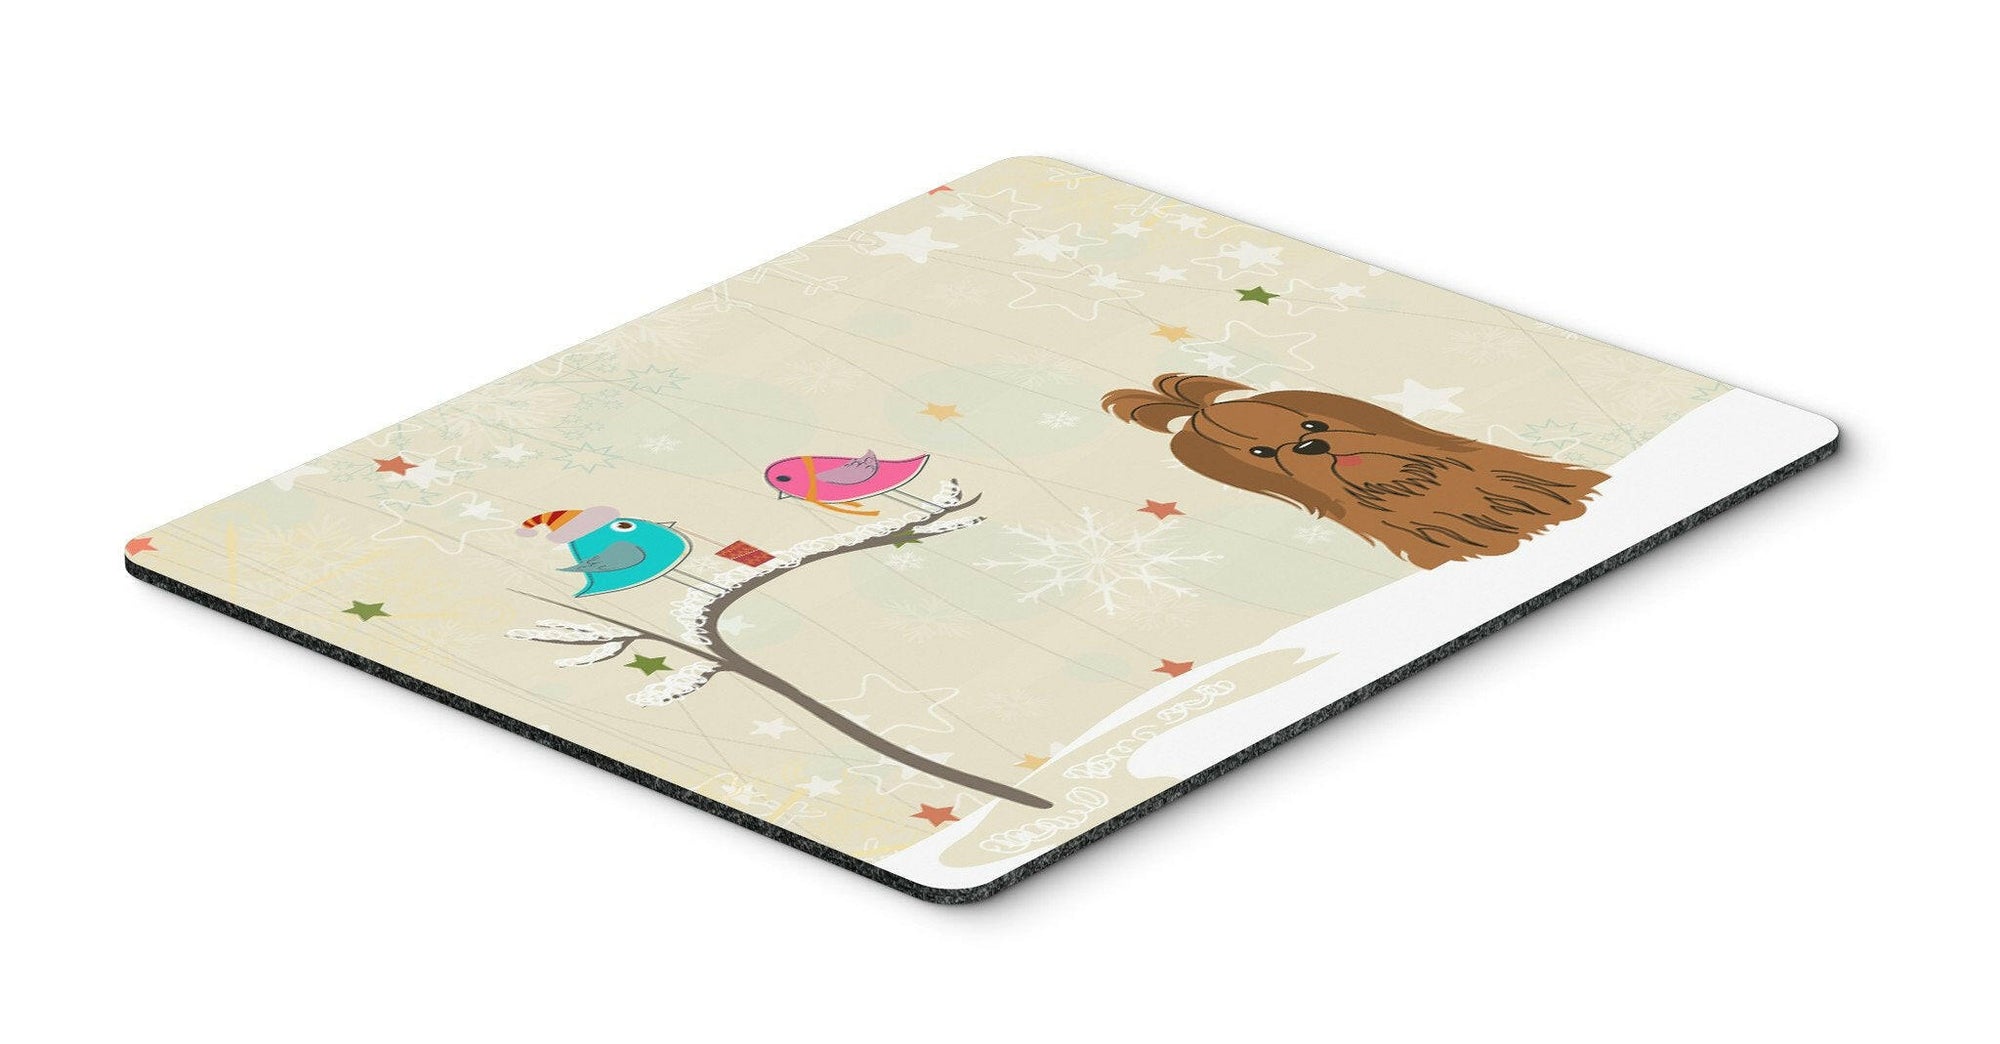 Christmas Presents between Friends Shih Tzu Chocolate Mouse Pad, Hot Pad or Trivet BB2558MP by Caroline's Treasures